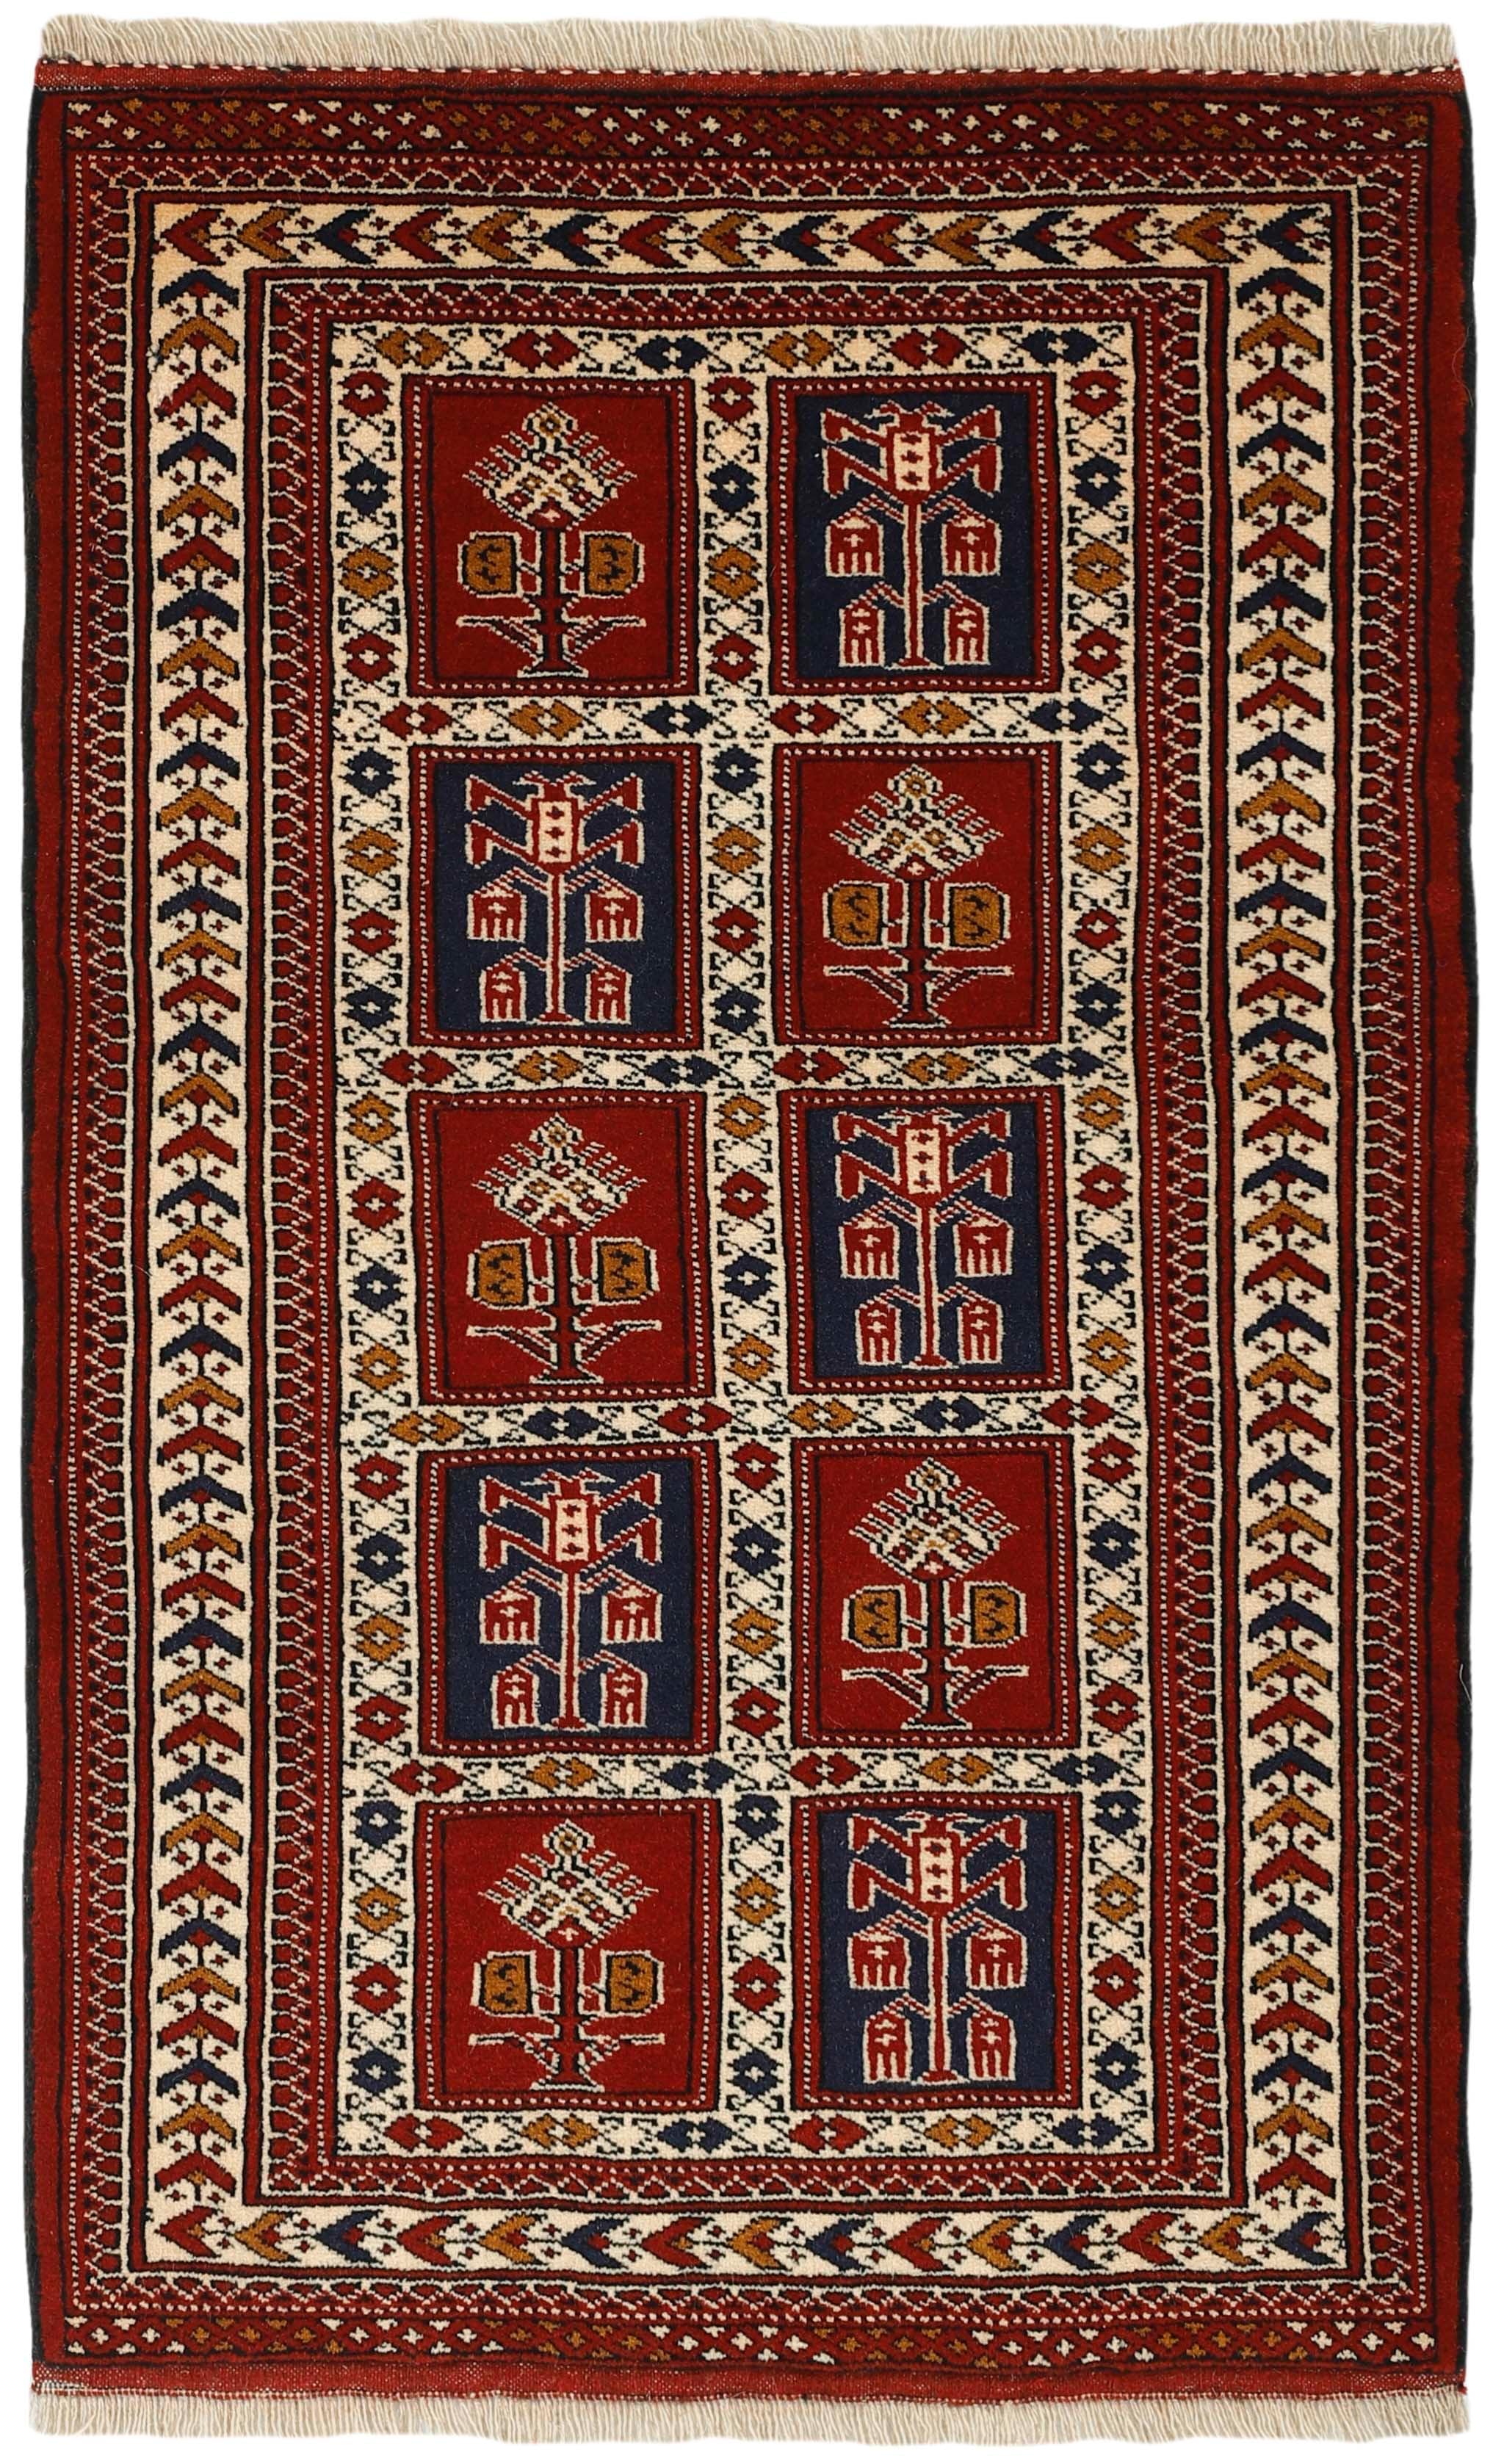 authentic red and black persian rug